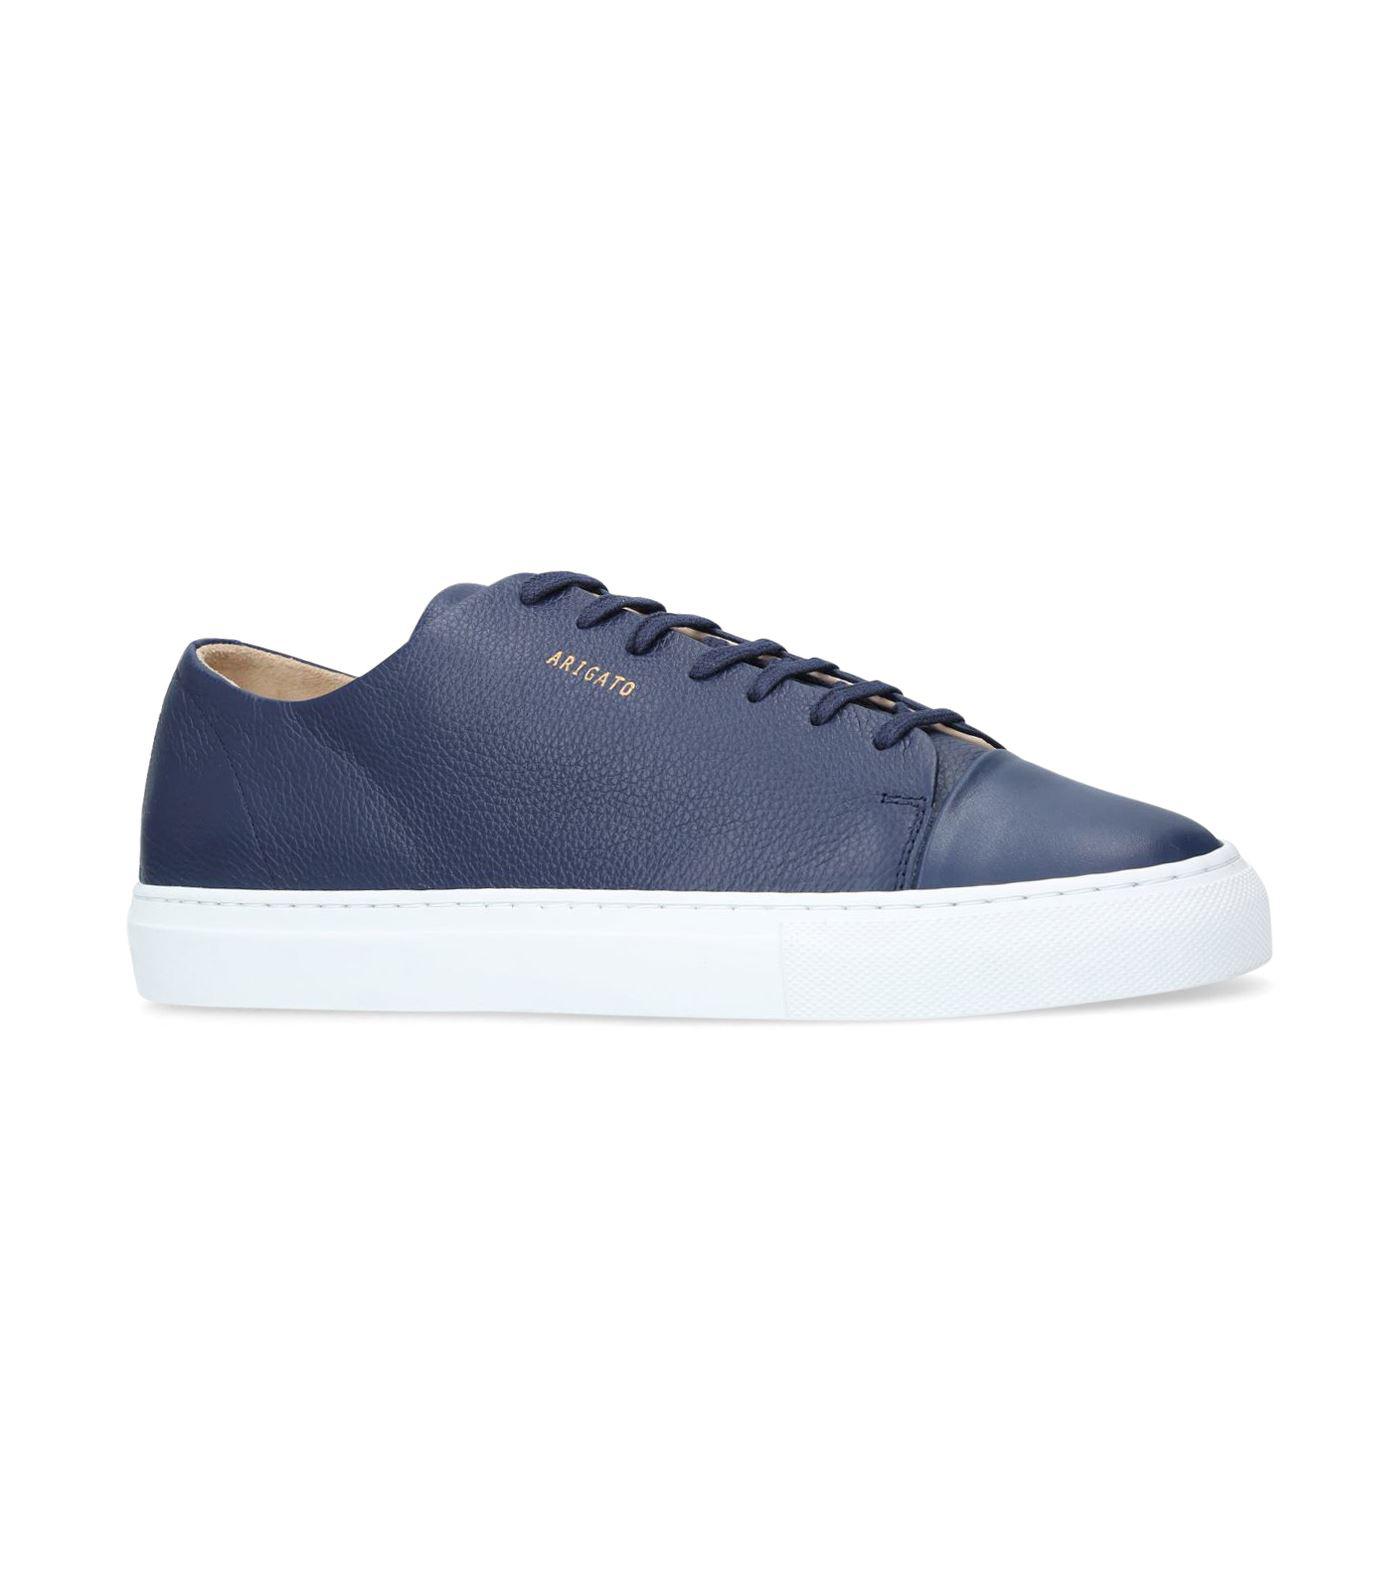 Axel Arigato Leather Cap-toe Sneakers in Navy (Blue) for Men - Lyst